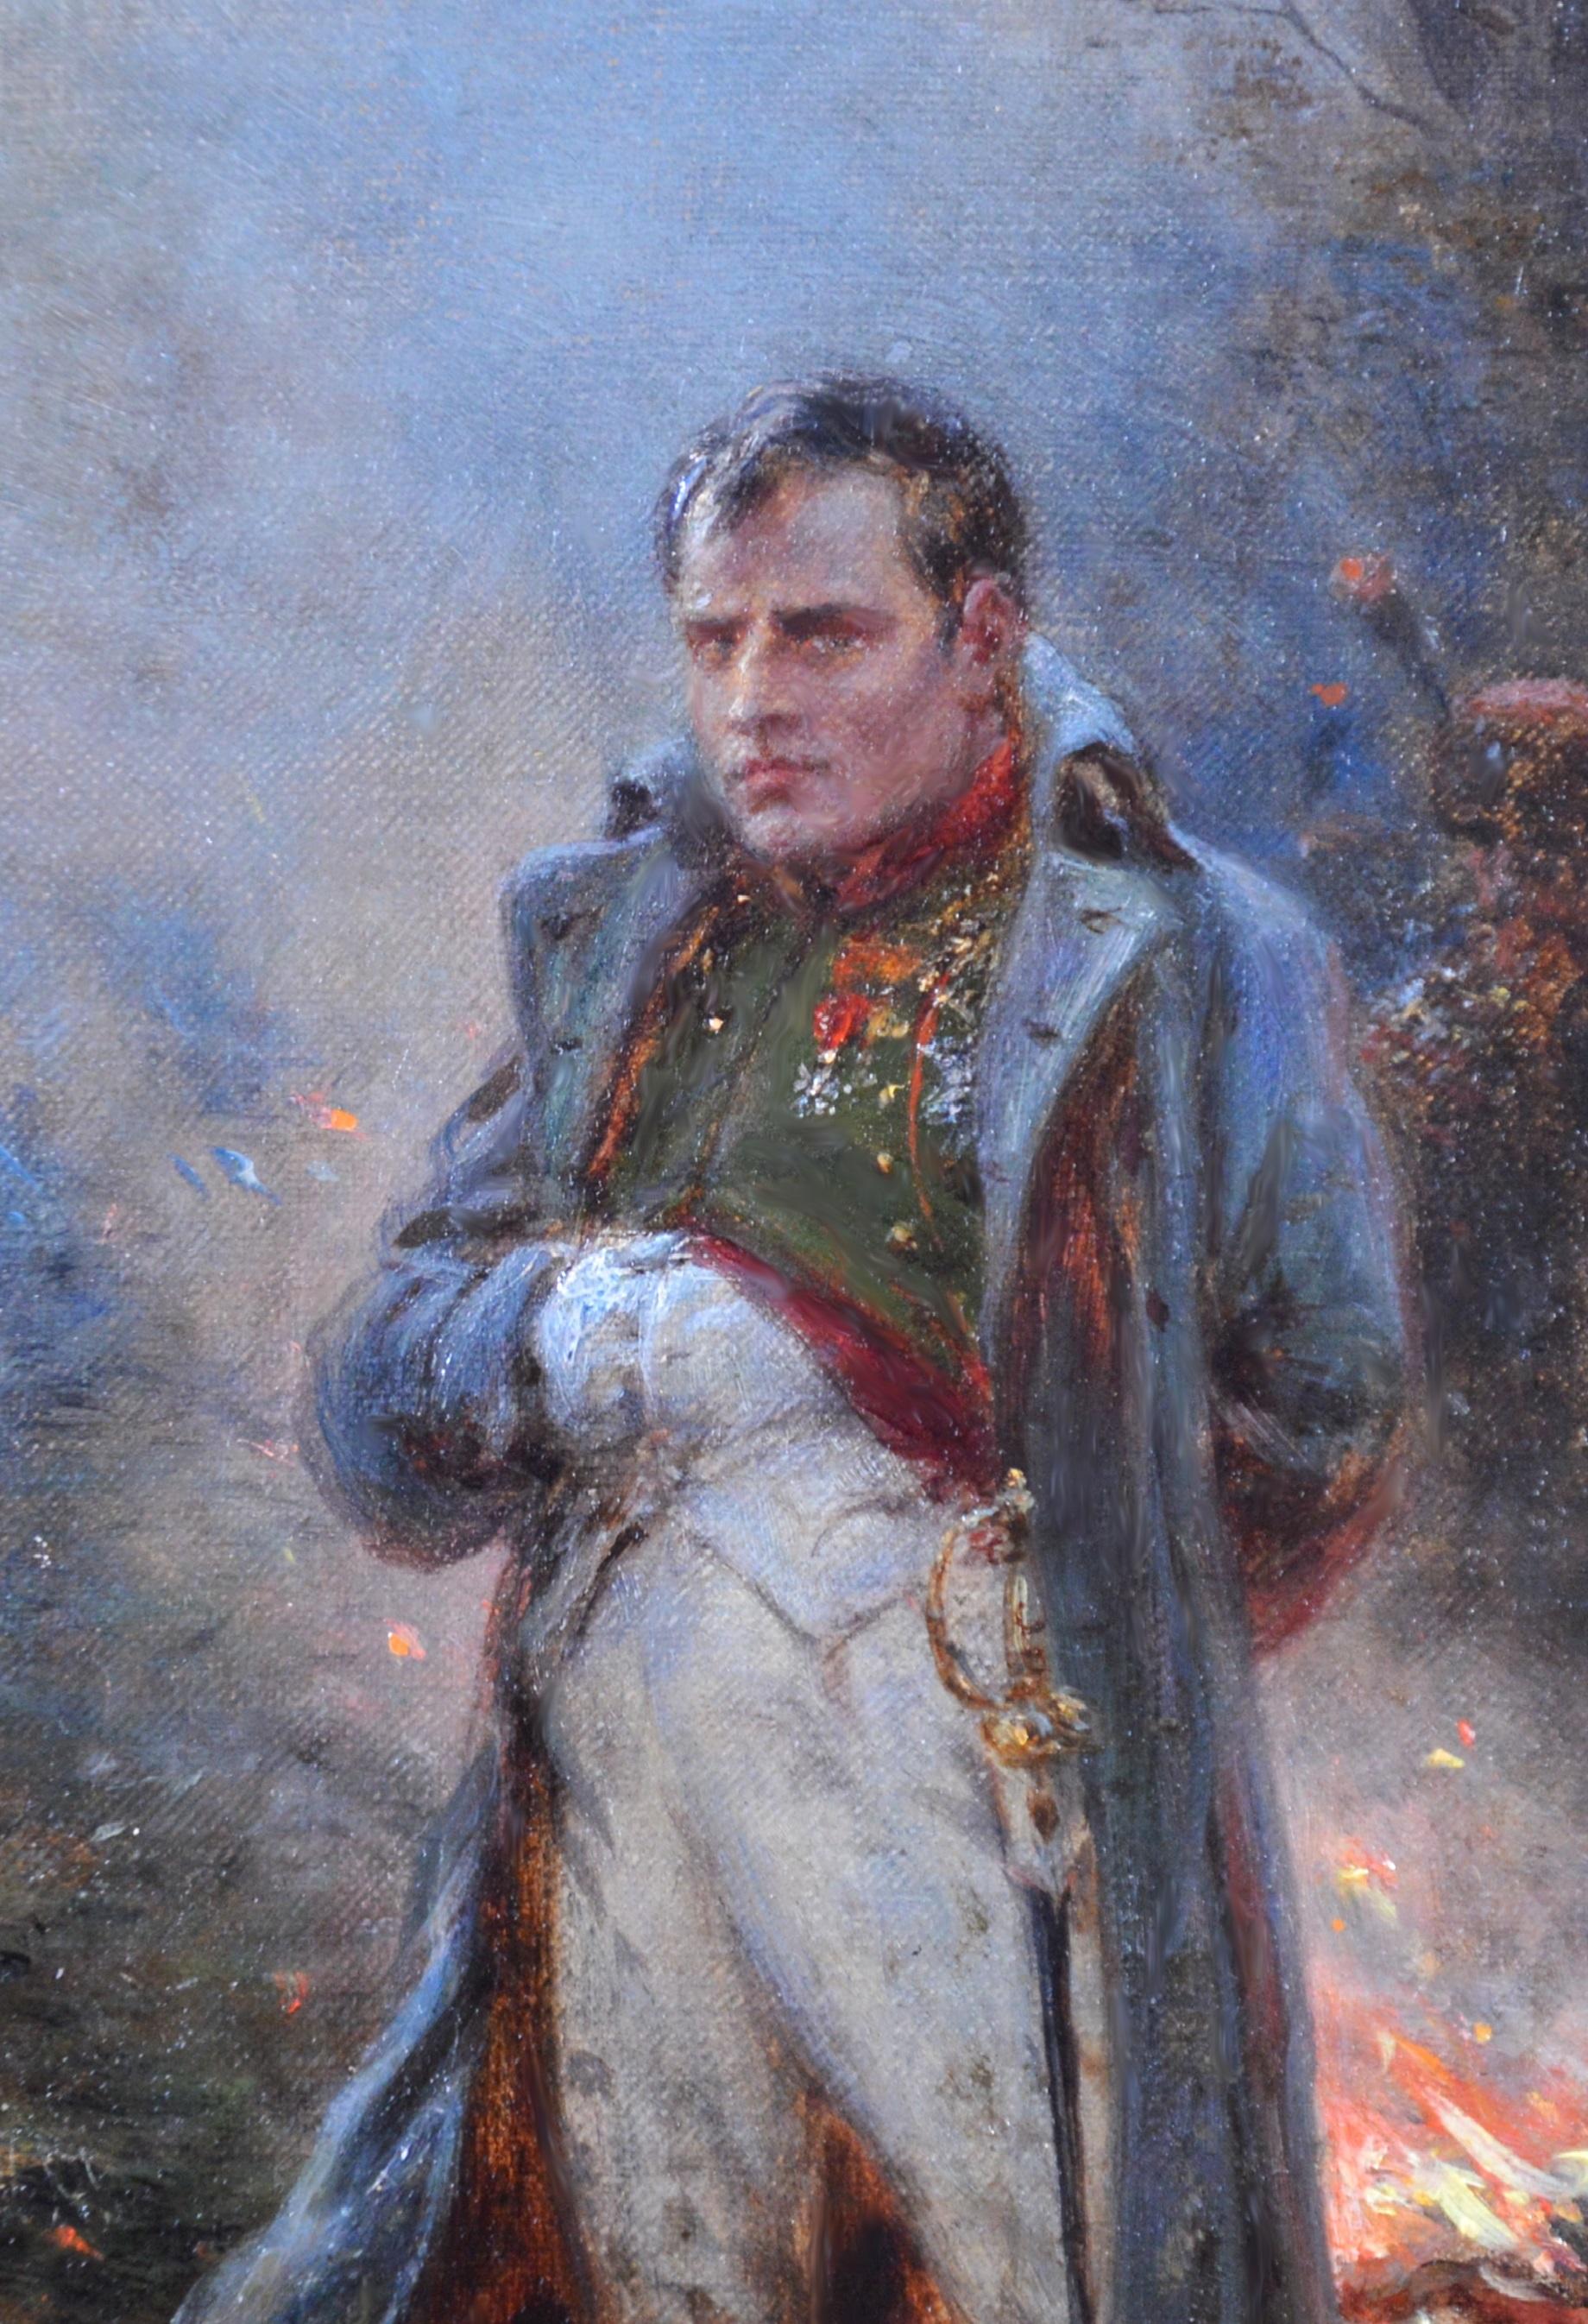 ‘Napoleon after Waterloo’ by Ernest Crofts RA (1847–1911).

The painting – which depicts the emperor in the aftermath of the battle and soldiers attempting to control his horse Marengo – is signed by the artist and dated 1896.

All our paintings are